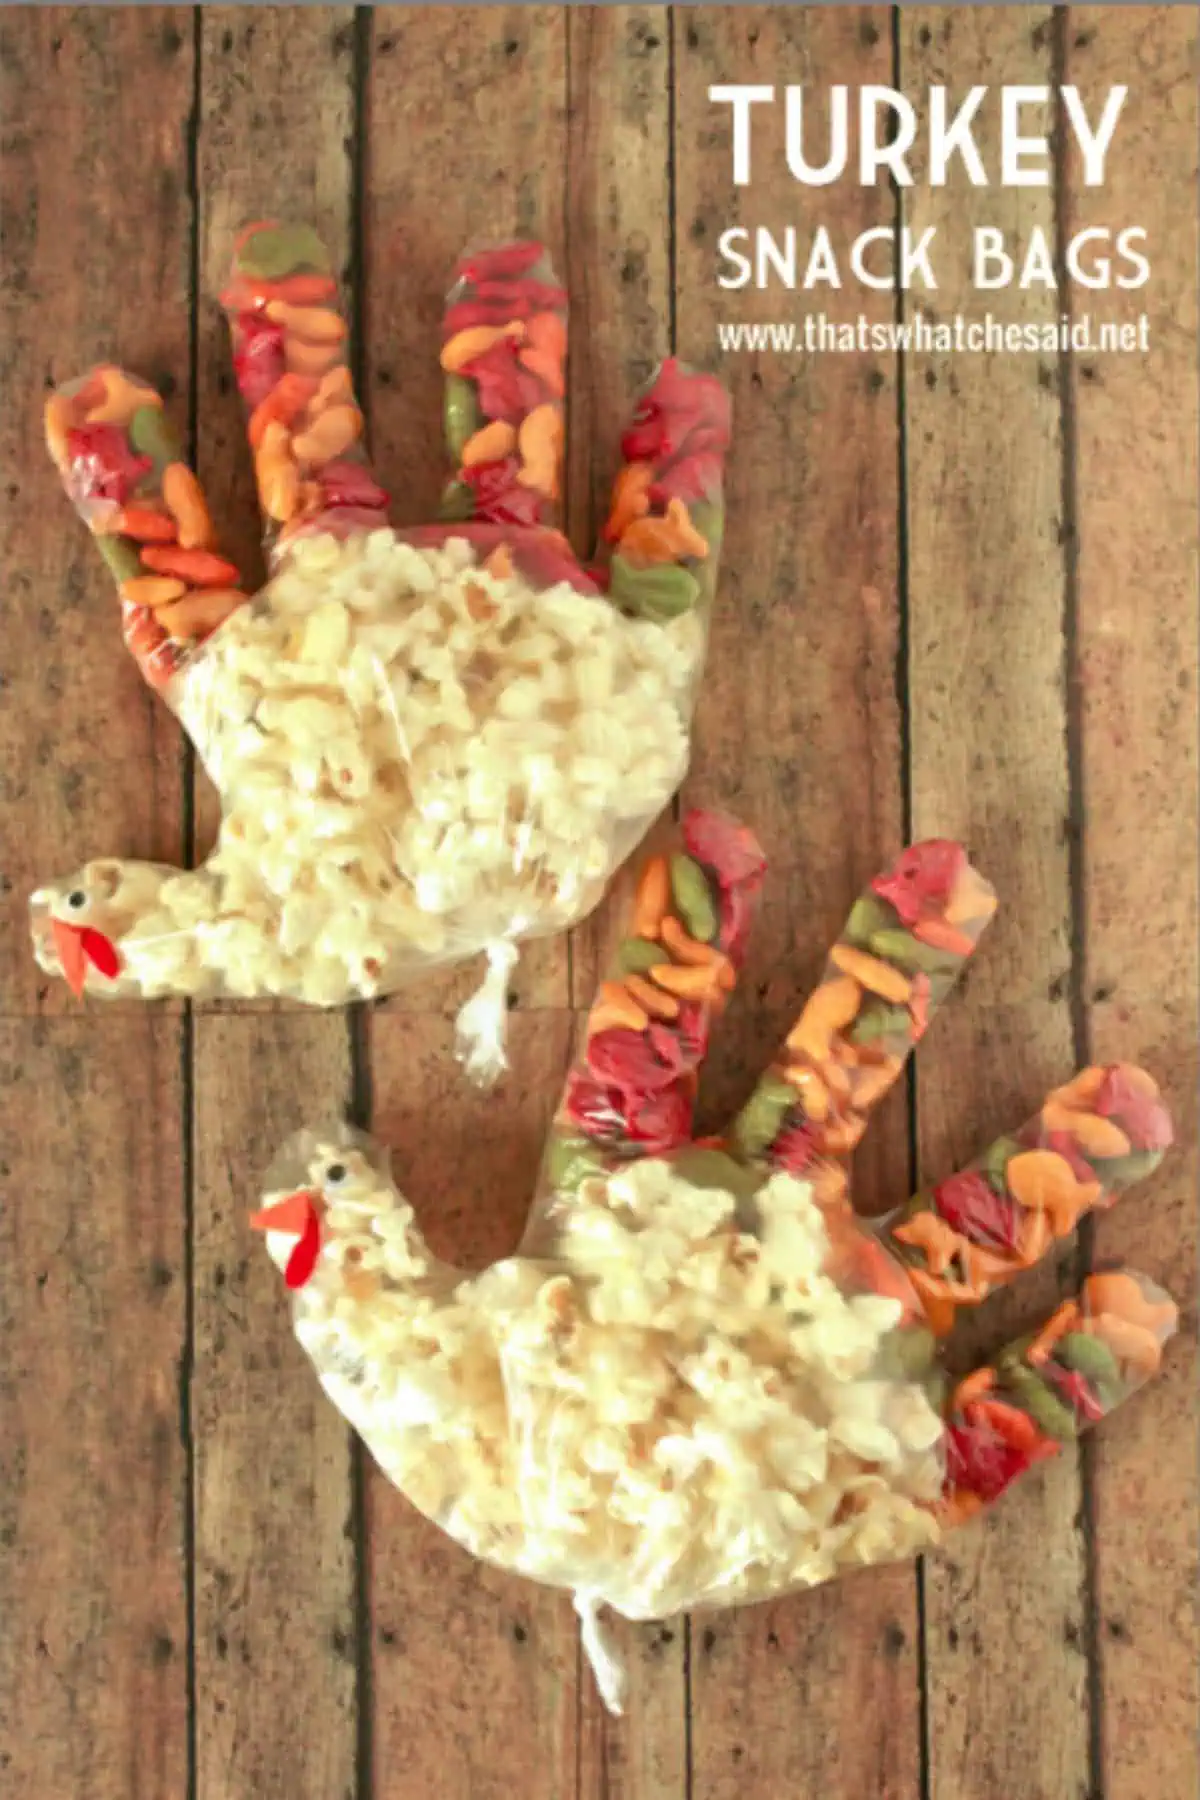 Clear glove filled with colored goldfish and popcorn to form a turkey shape as a fun and easy fall snack idea